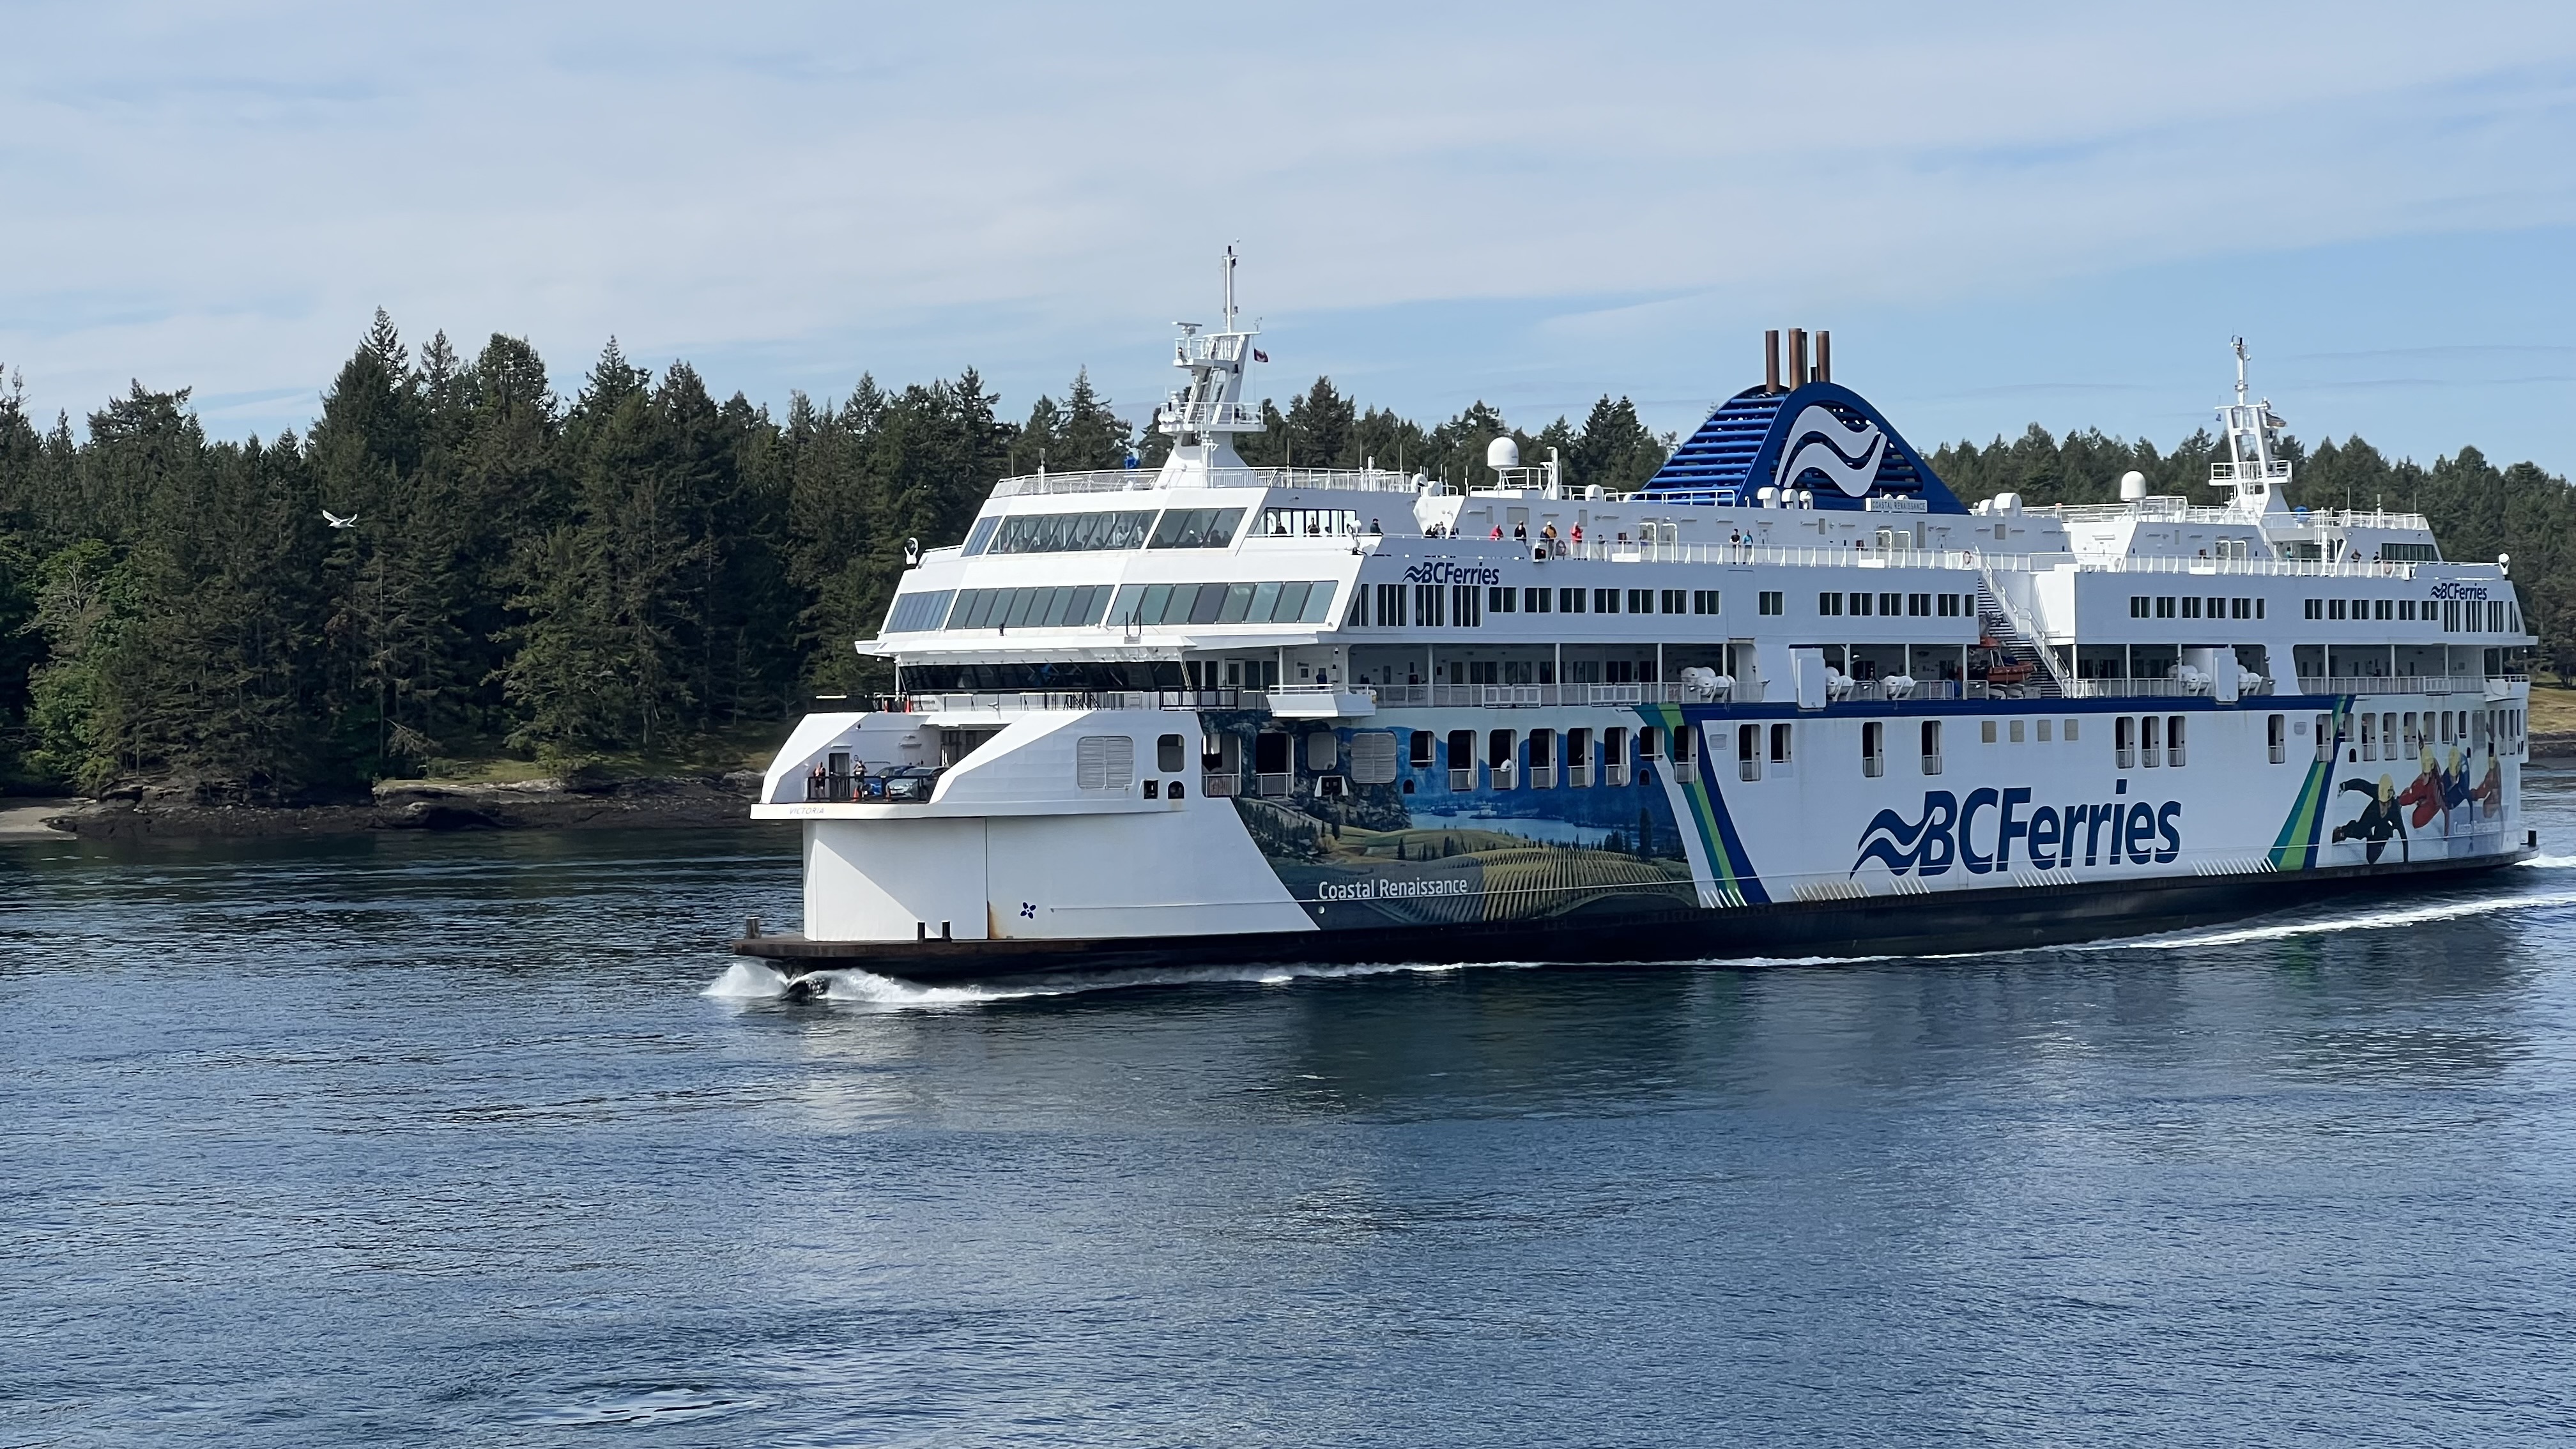 BC Ferries extends Coastal Renaissance repairs to March